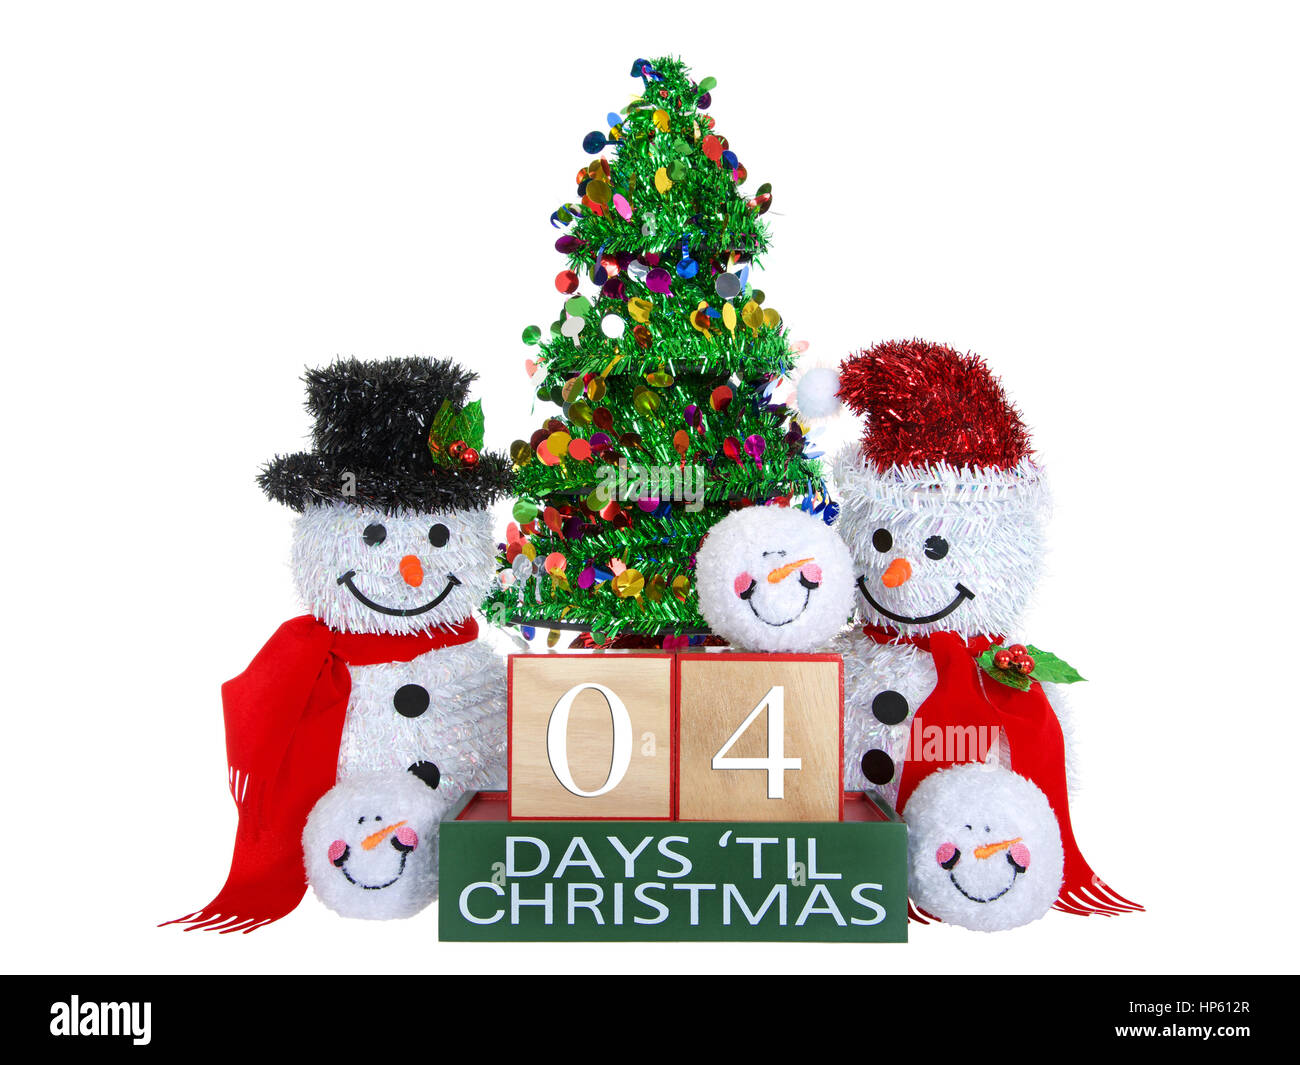 04 Days until Christmas light beech wood blocks with red trim on a green base with tinsel christmas tree, mr and mrs snowman and snowball snowmen head Stock Photo